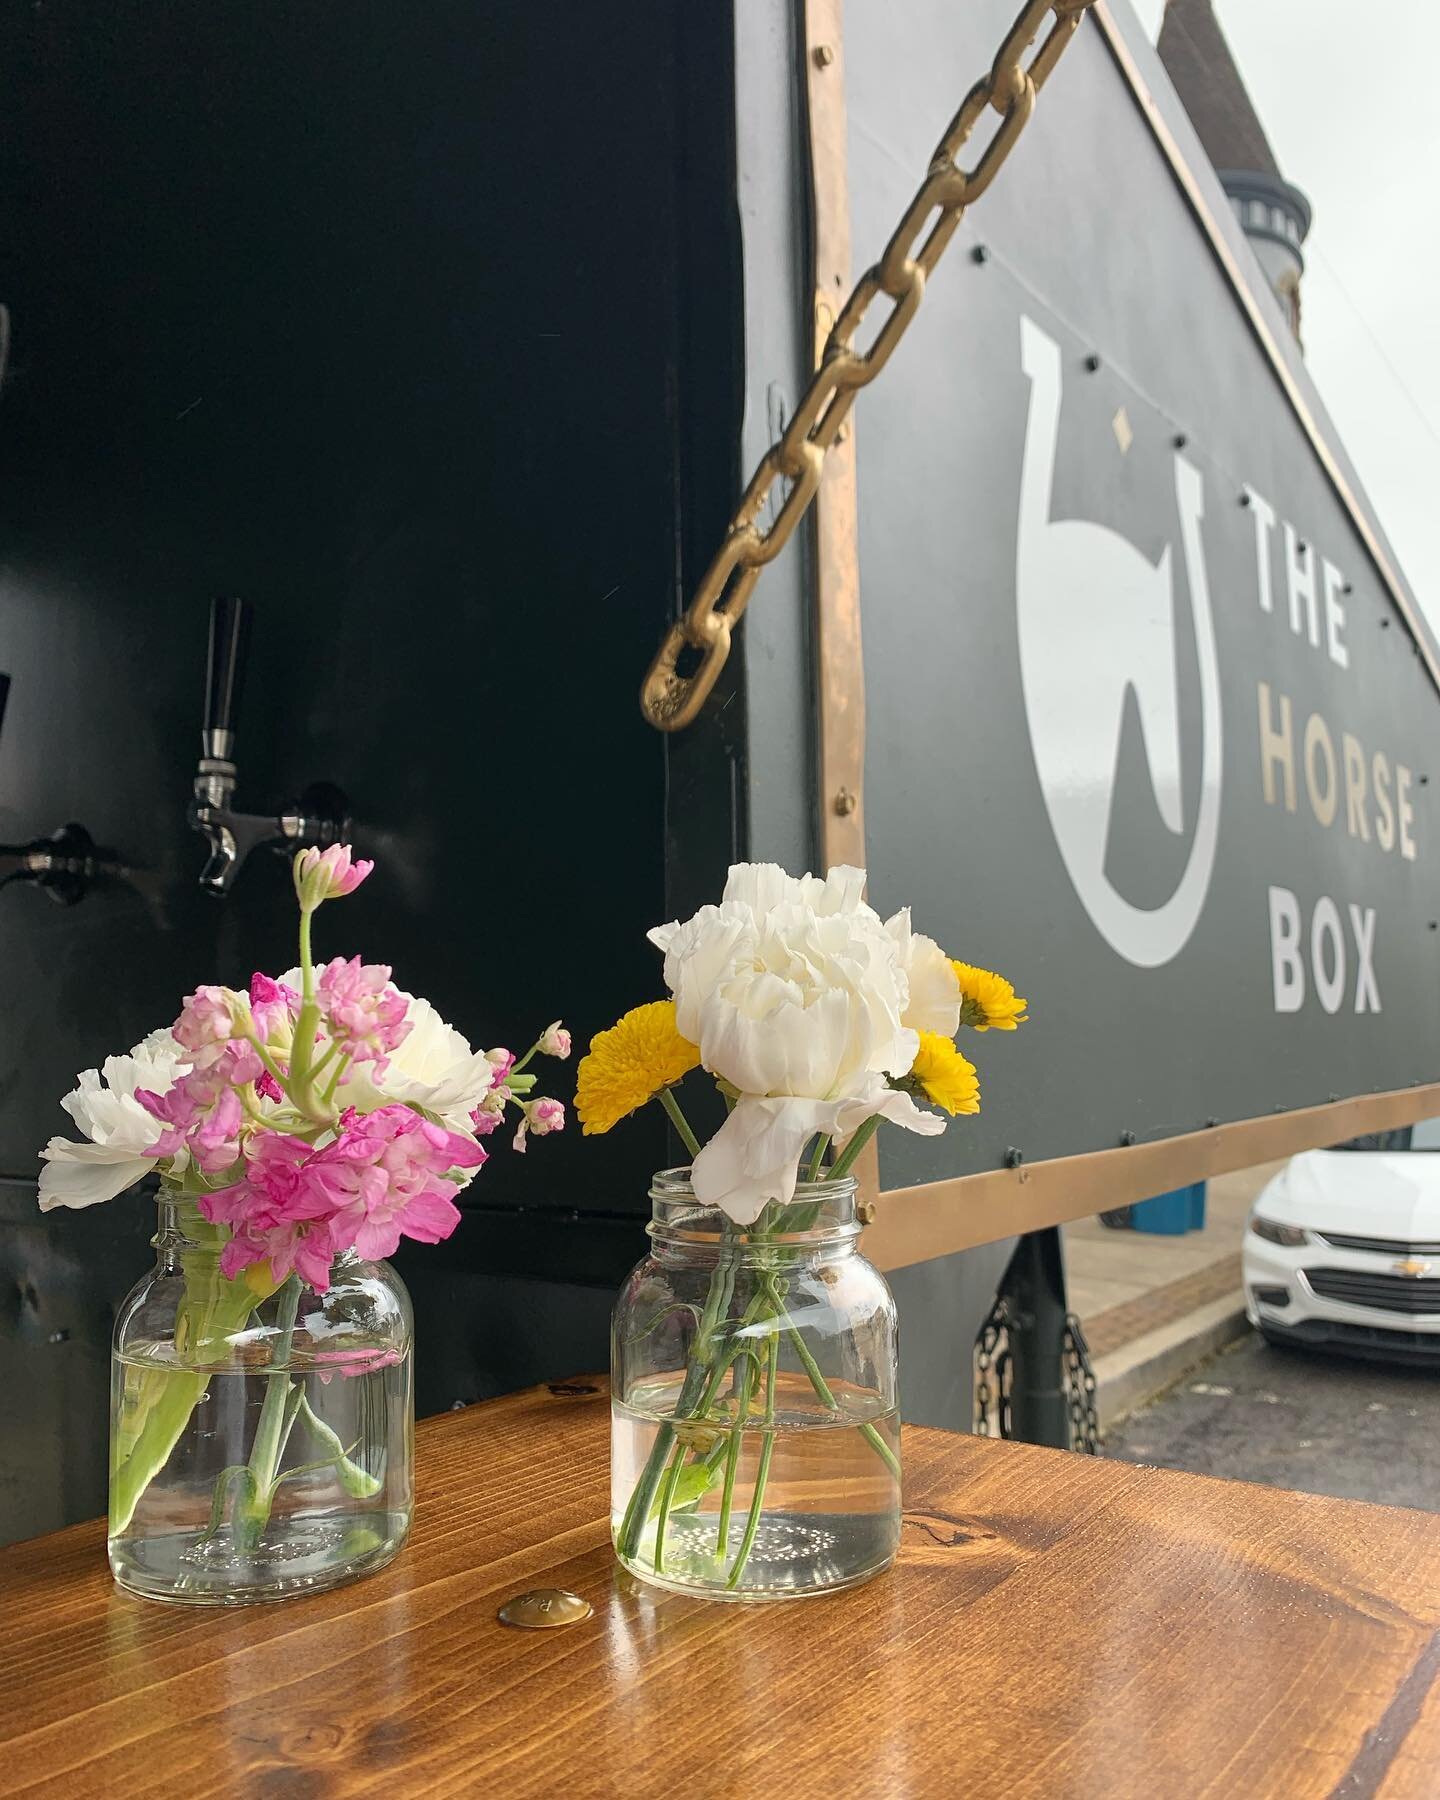 Oh hey there, it&rsquo;s been a while. 👋
We had a blast popping up in Harrodsburg last week for the opening of new bridal boutique, The White Cadillac.

Who&rsquo;s ready to party with us? Where should we go next?